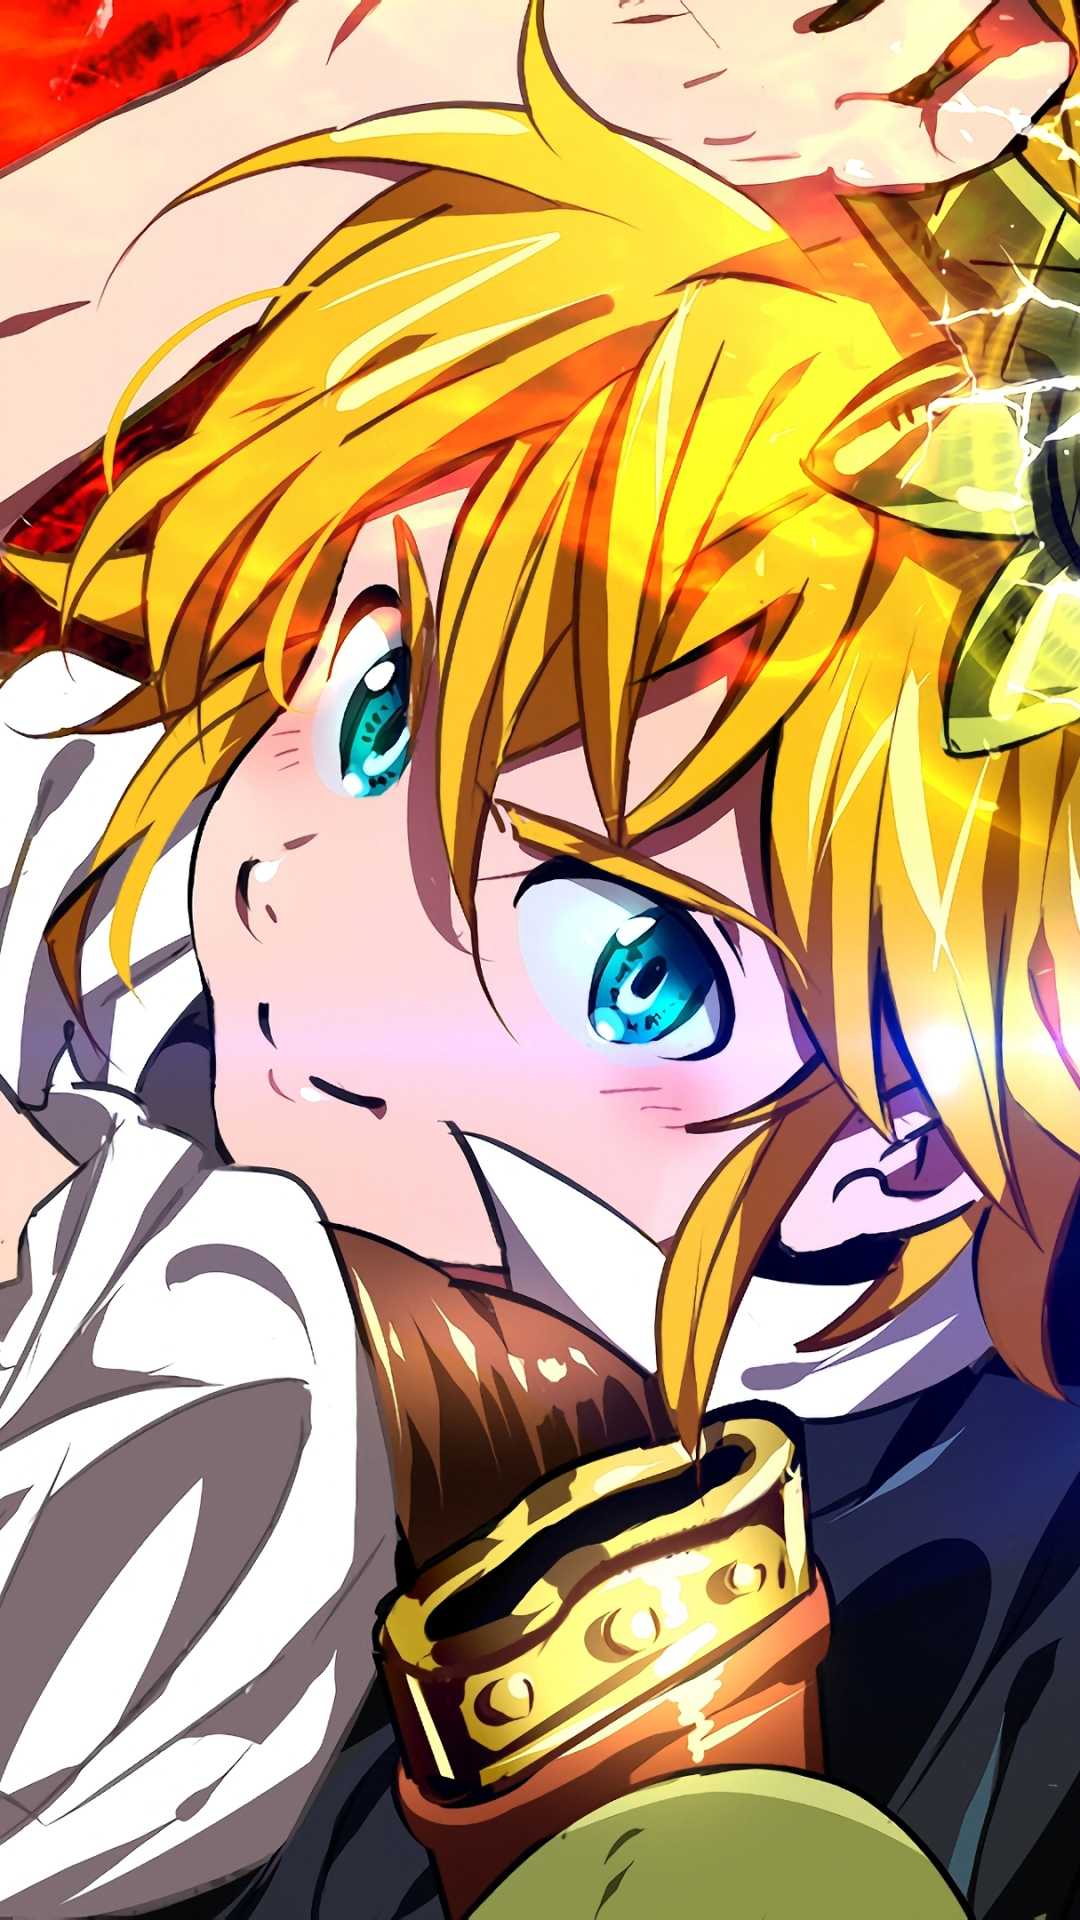 Wallpaper ID 342422  Anime The Seven Deadly Sins Phone Wallpaper Meliodas  The Seven Deadly Sins Elizabeth Liones 1200x1920 free download